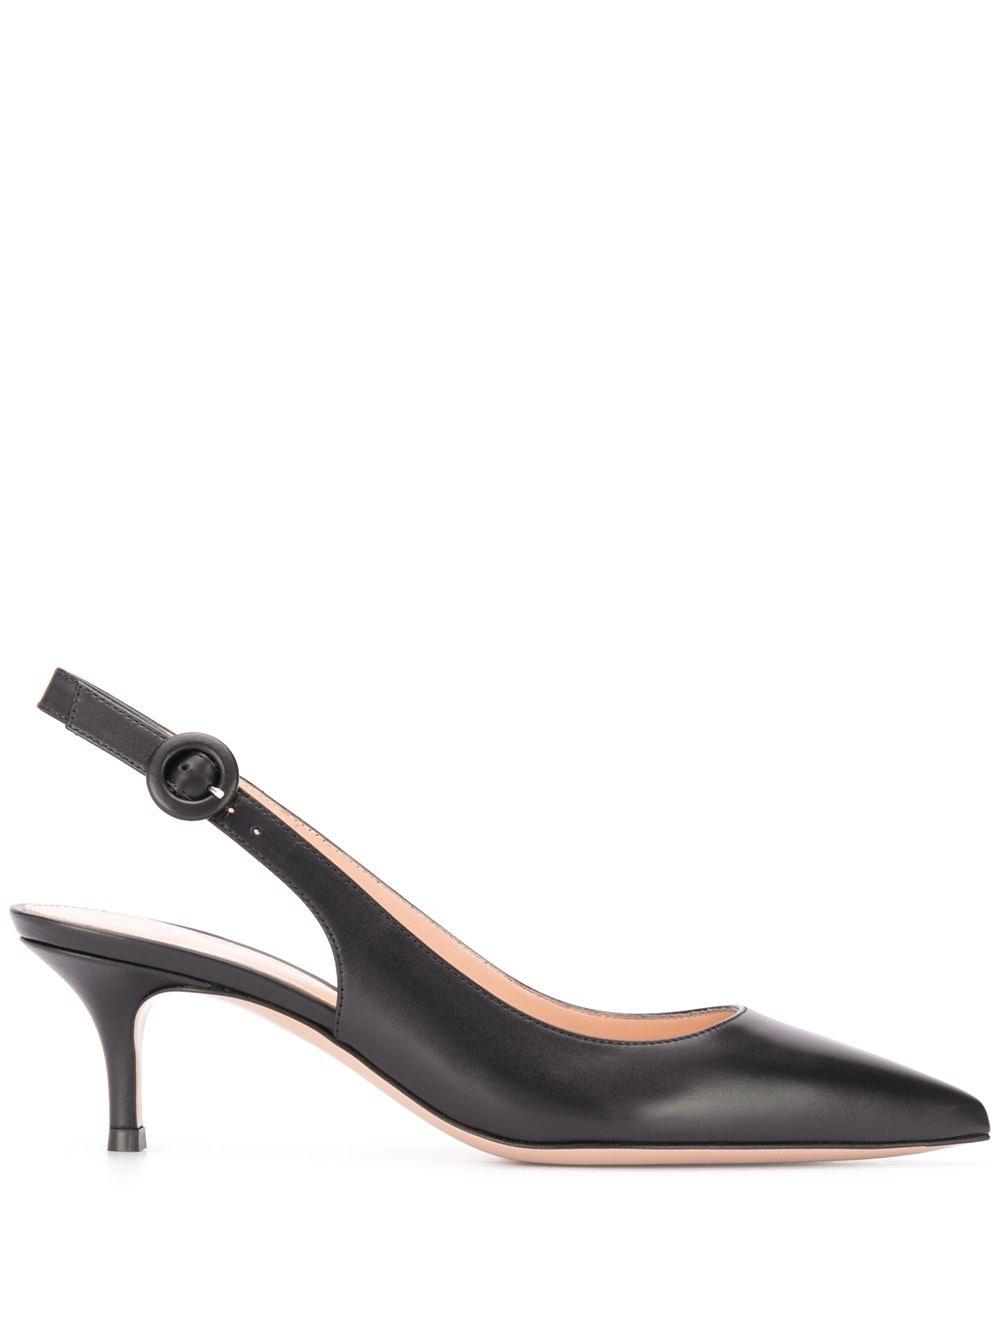 Gianvito Rossi Anna 55 Suede Slingback Pumps in Black - Save 16% - Lyst